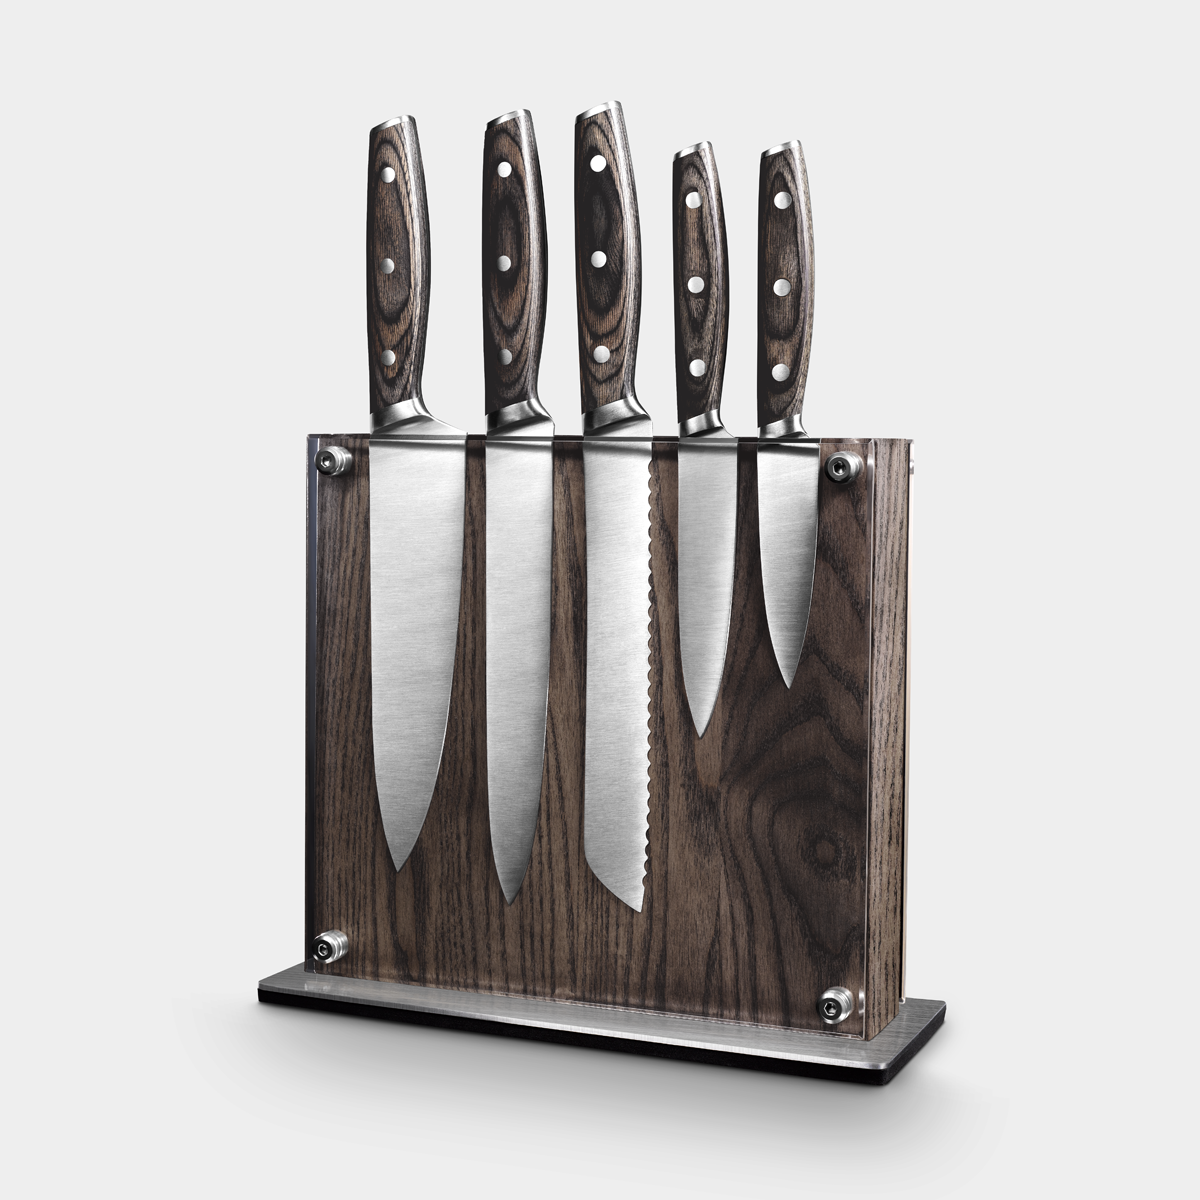 Styled Settings White Knife Set with Block and Sharpener Tool, 14 Piece Knife Set with Block, Stainless Steel Knives Set - Including Heavy Duty Butche